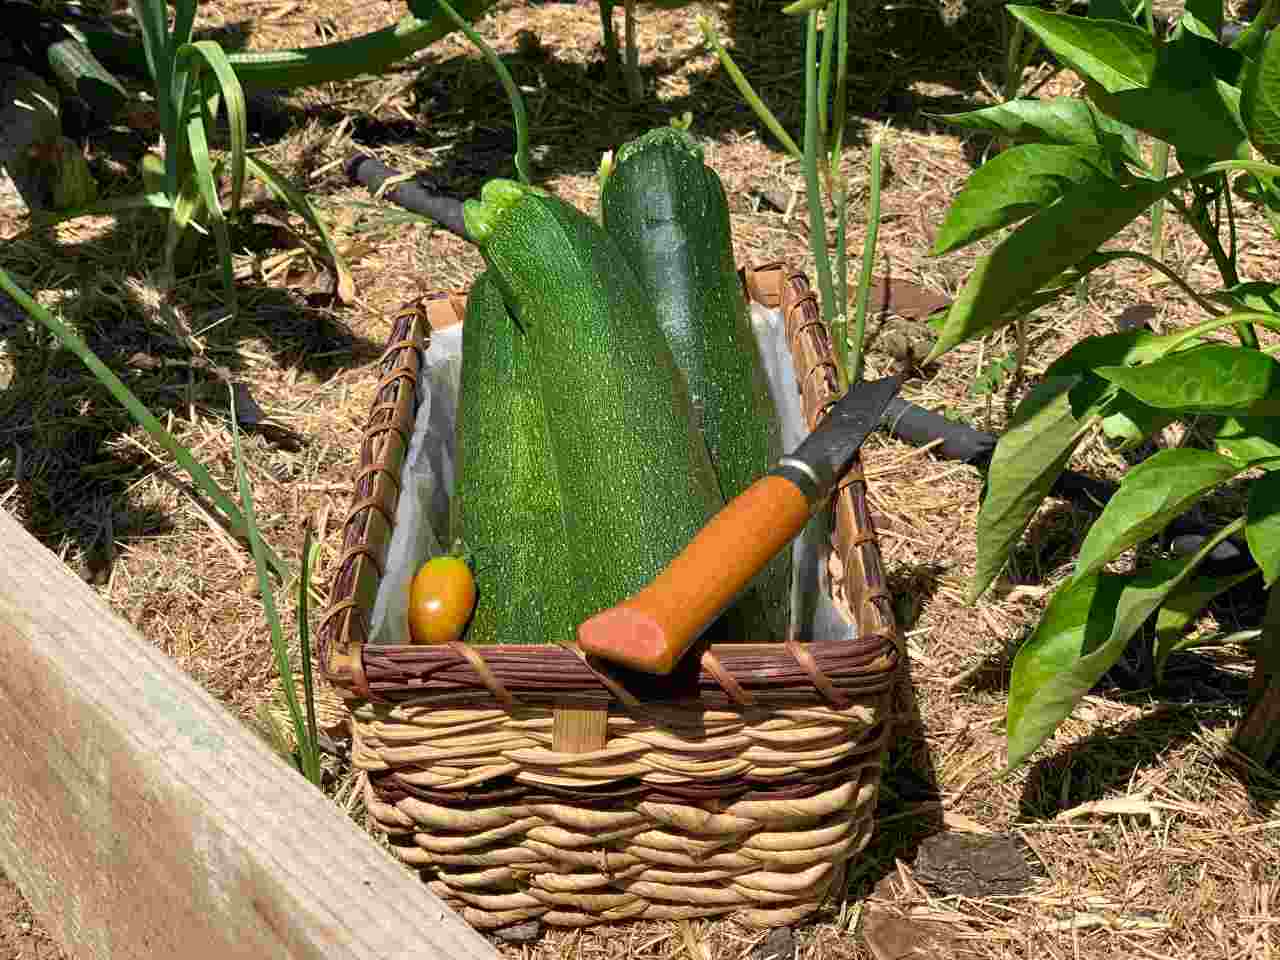 Moving to the countryside - Zucchini